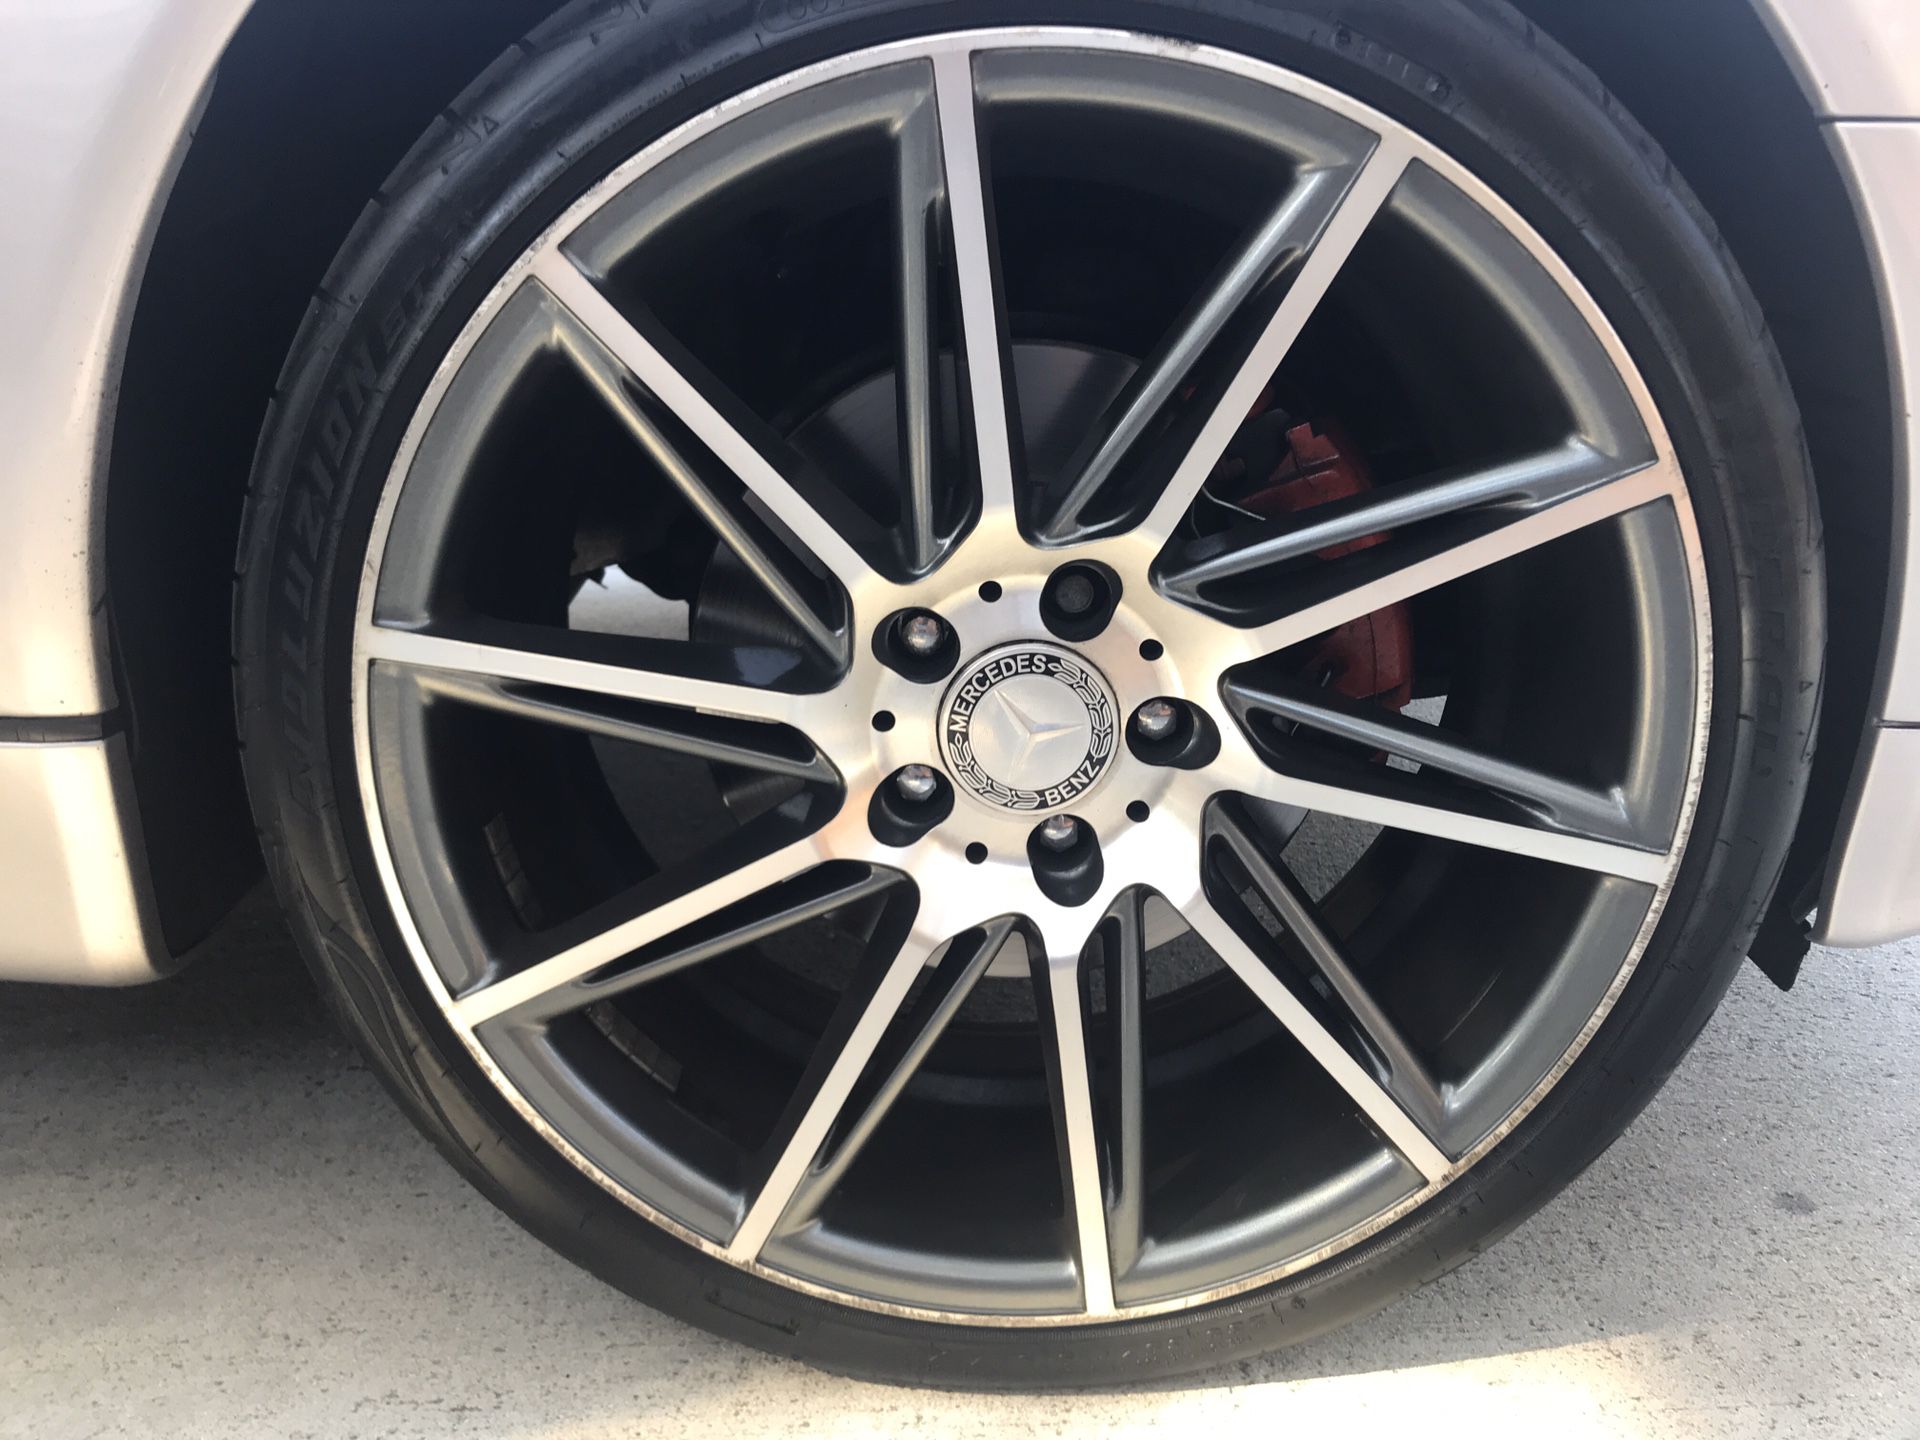 19” Wheels & Tires for sale!